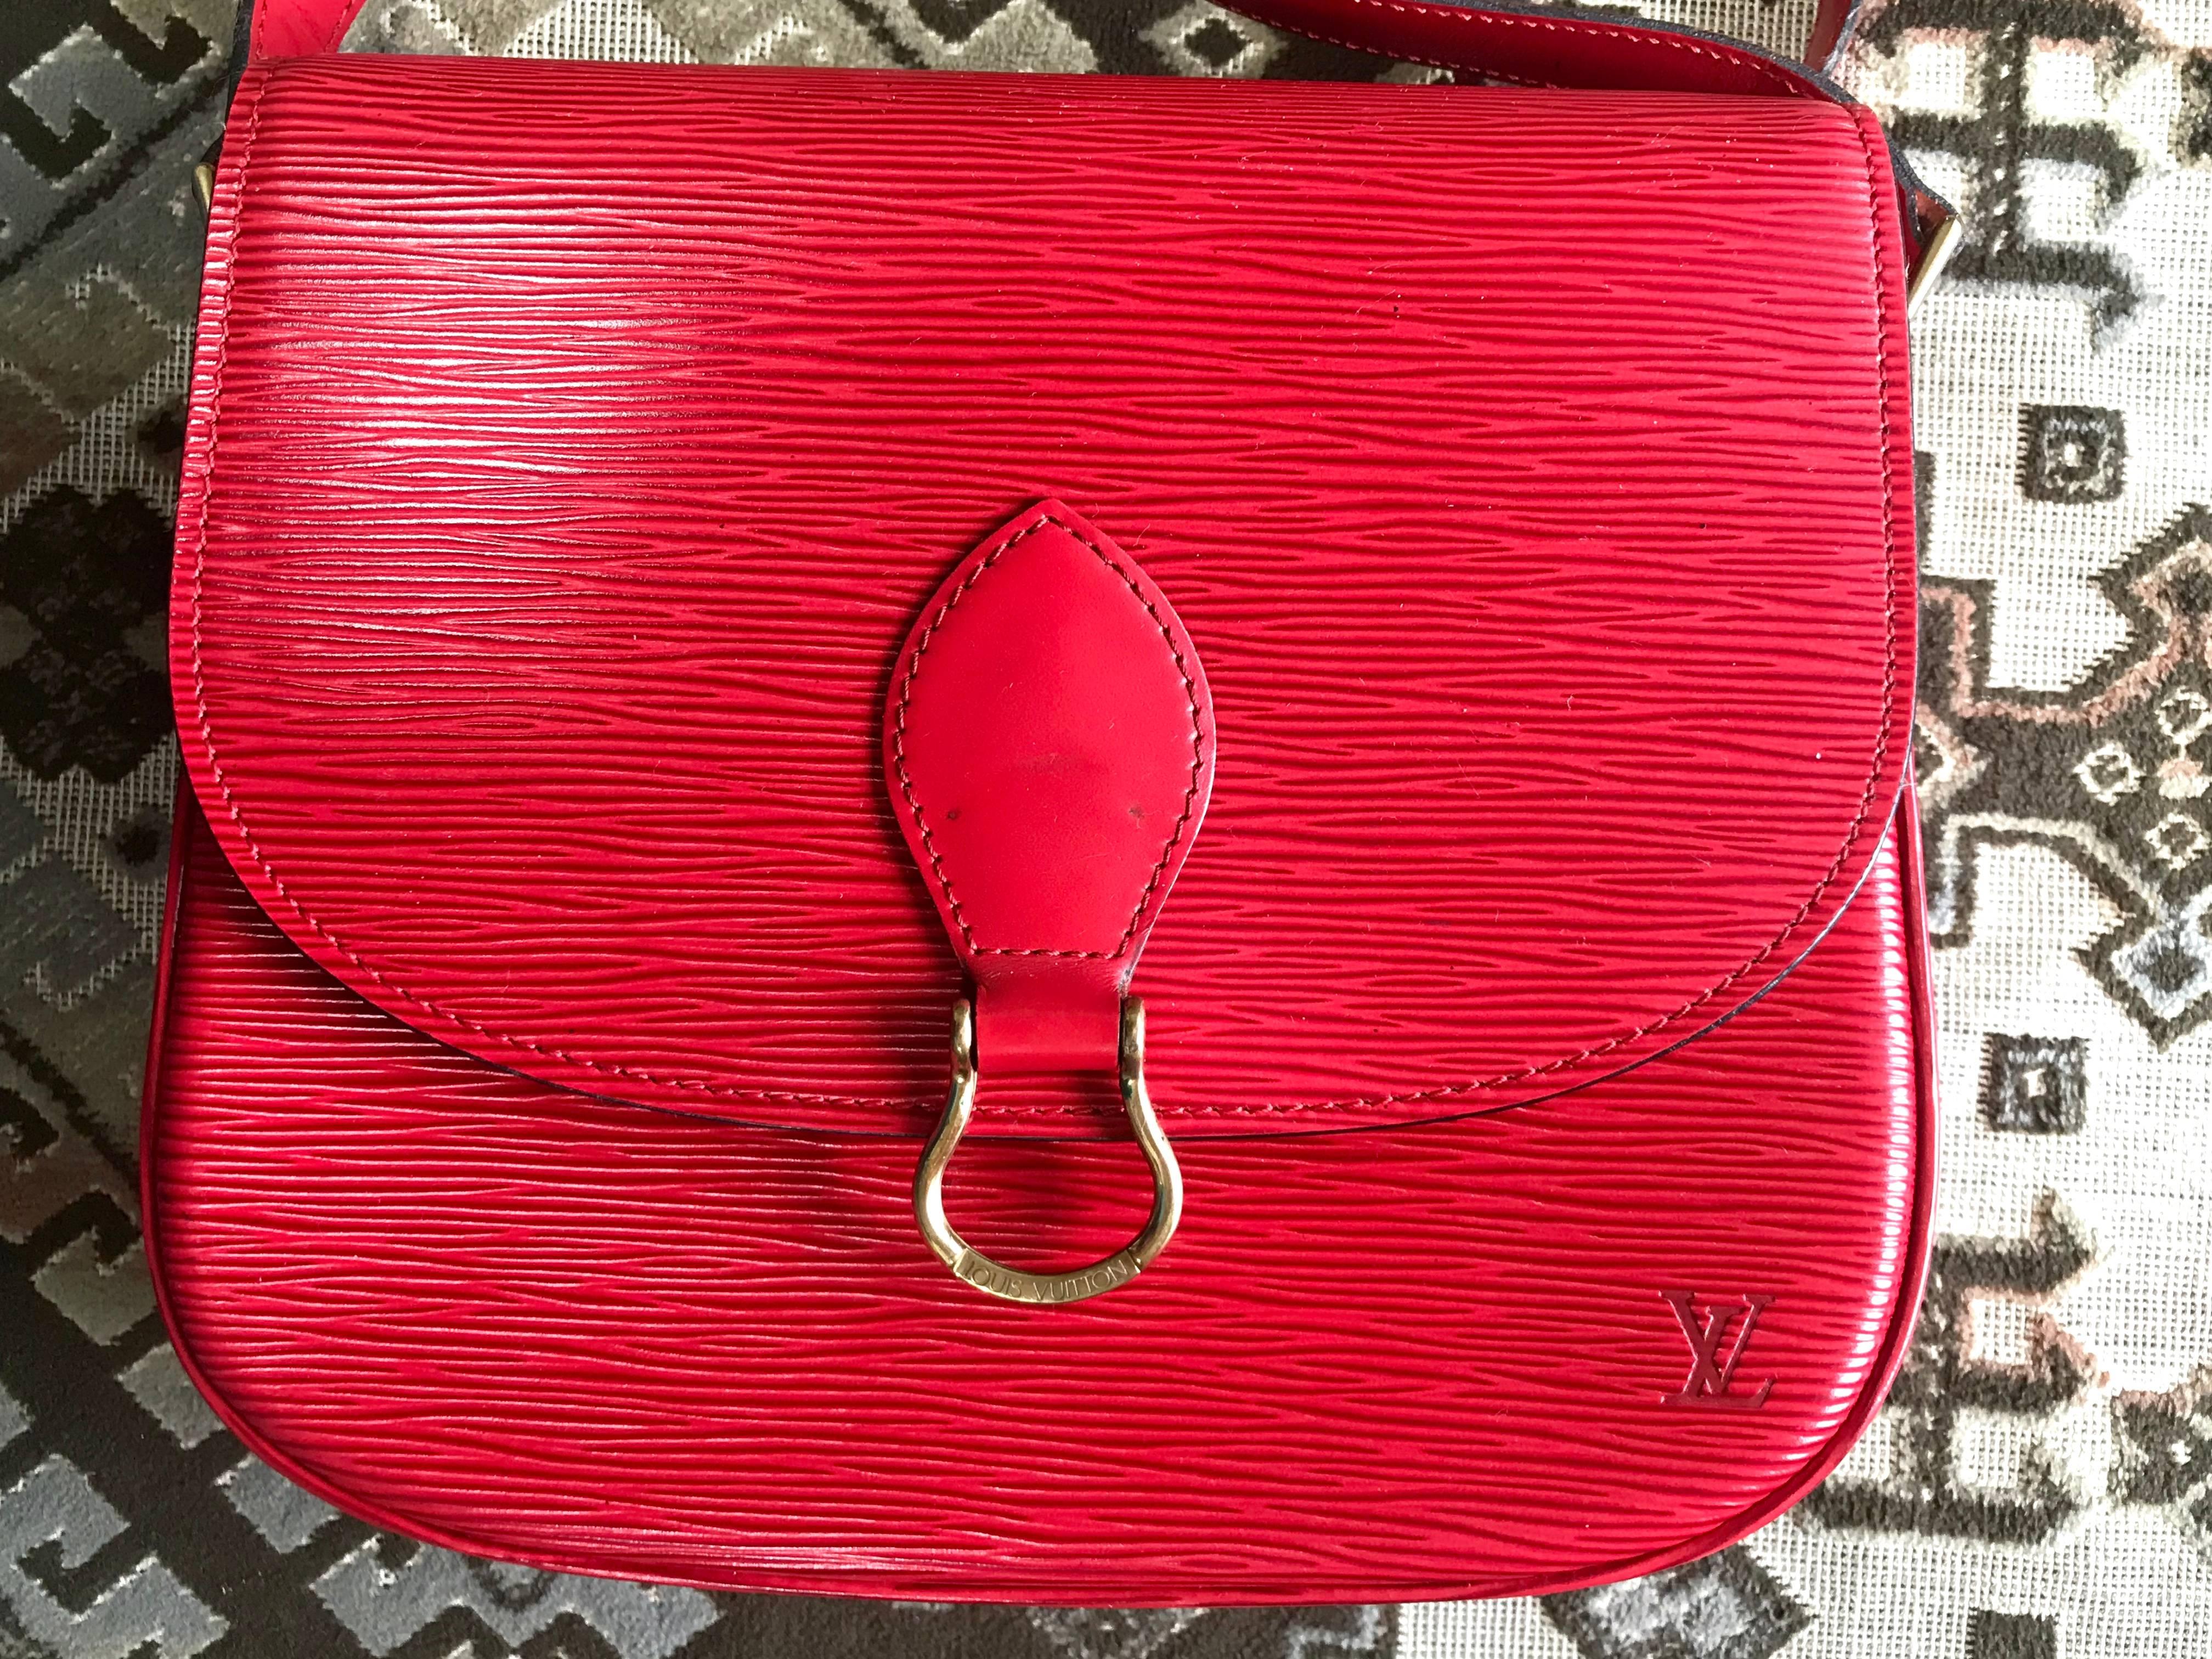 1990’s Vintage Louis Vuitton red epi leather shoulder bag. Classic purse. Perfect vintage accent to your outfit. Hot lipstick red. Great gift.

This is one of the most popular styles of vintage Louis Vuitton back in the 90's.

If you are looking for